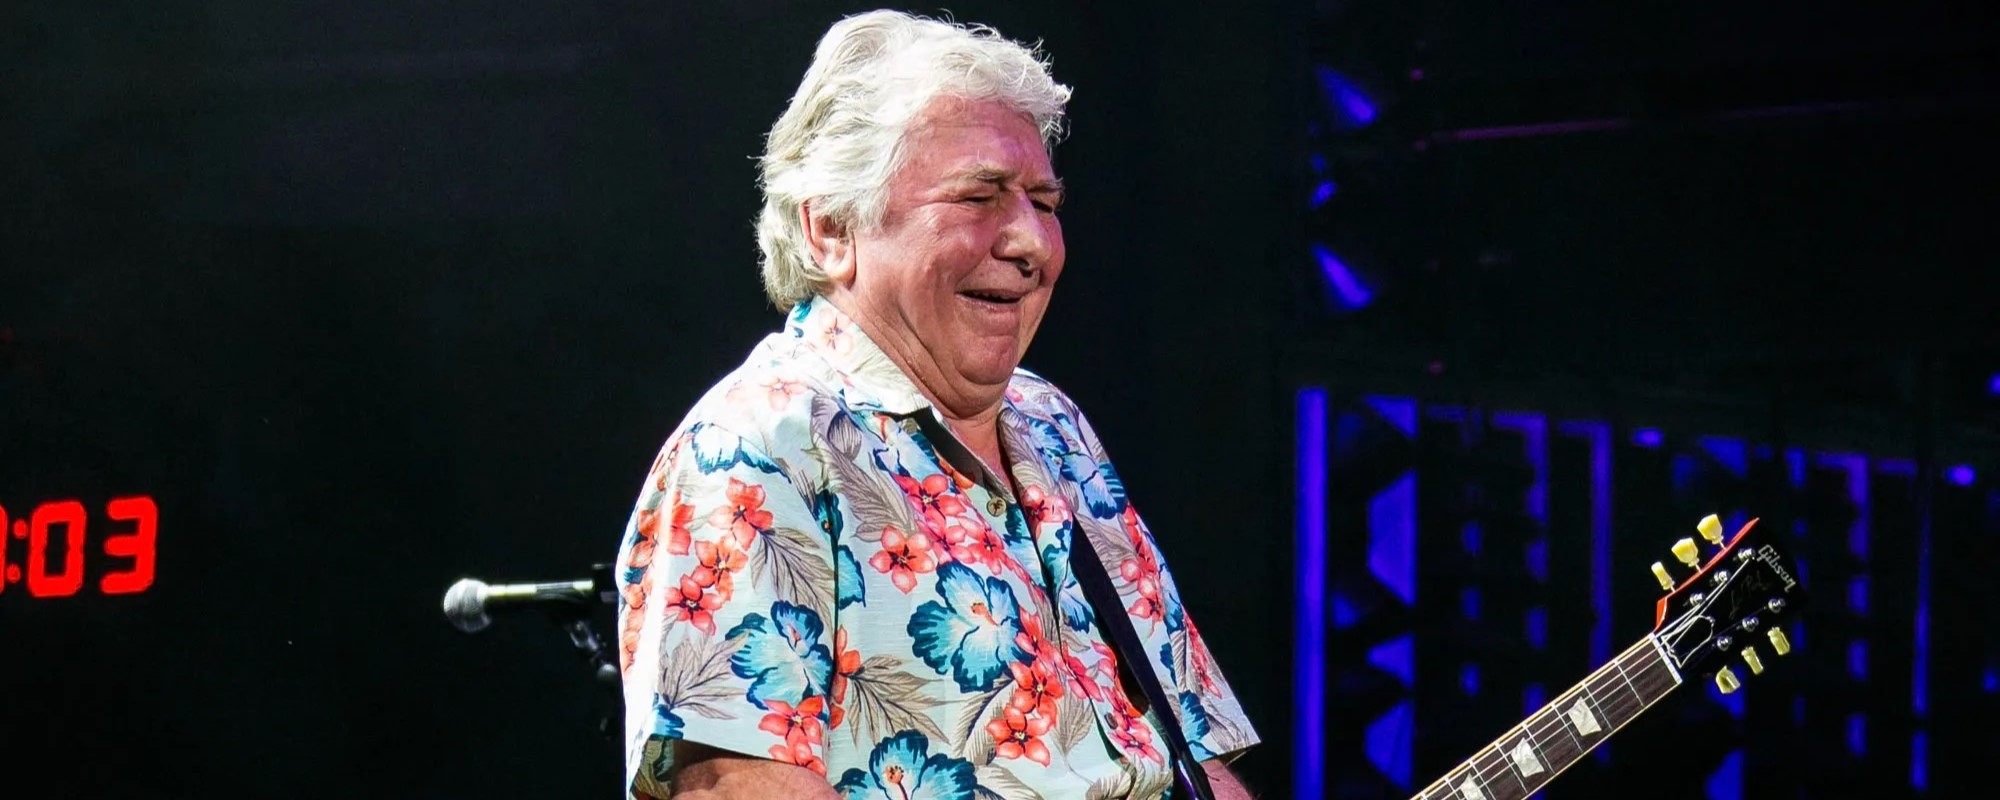 5 Classic Songs Featuring Mott the Hoople/Bad Company Guitarist Mick Ralphs in Honor of His 80th Birthday